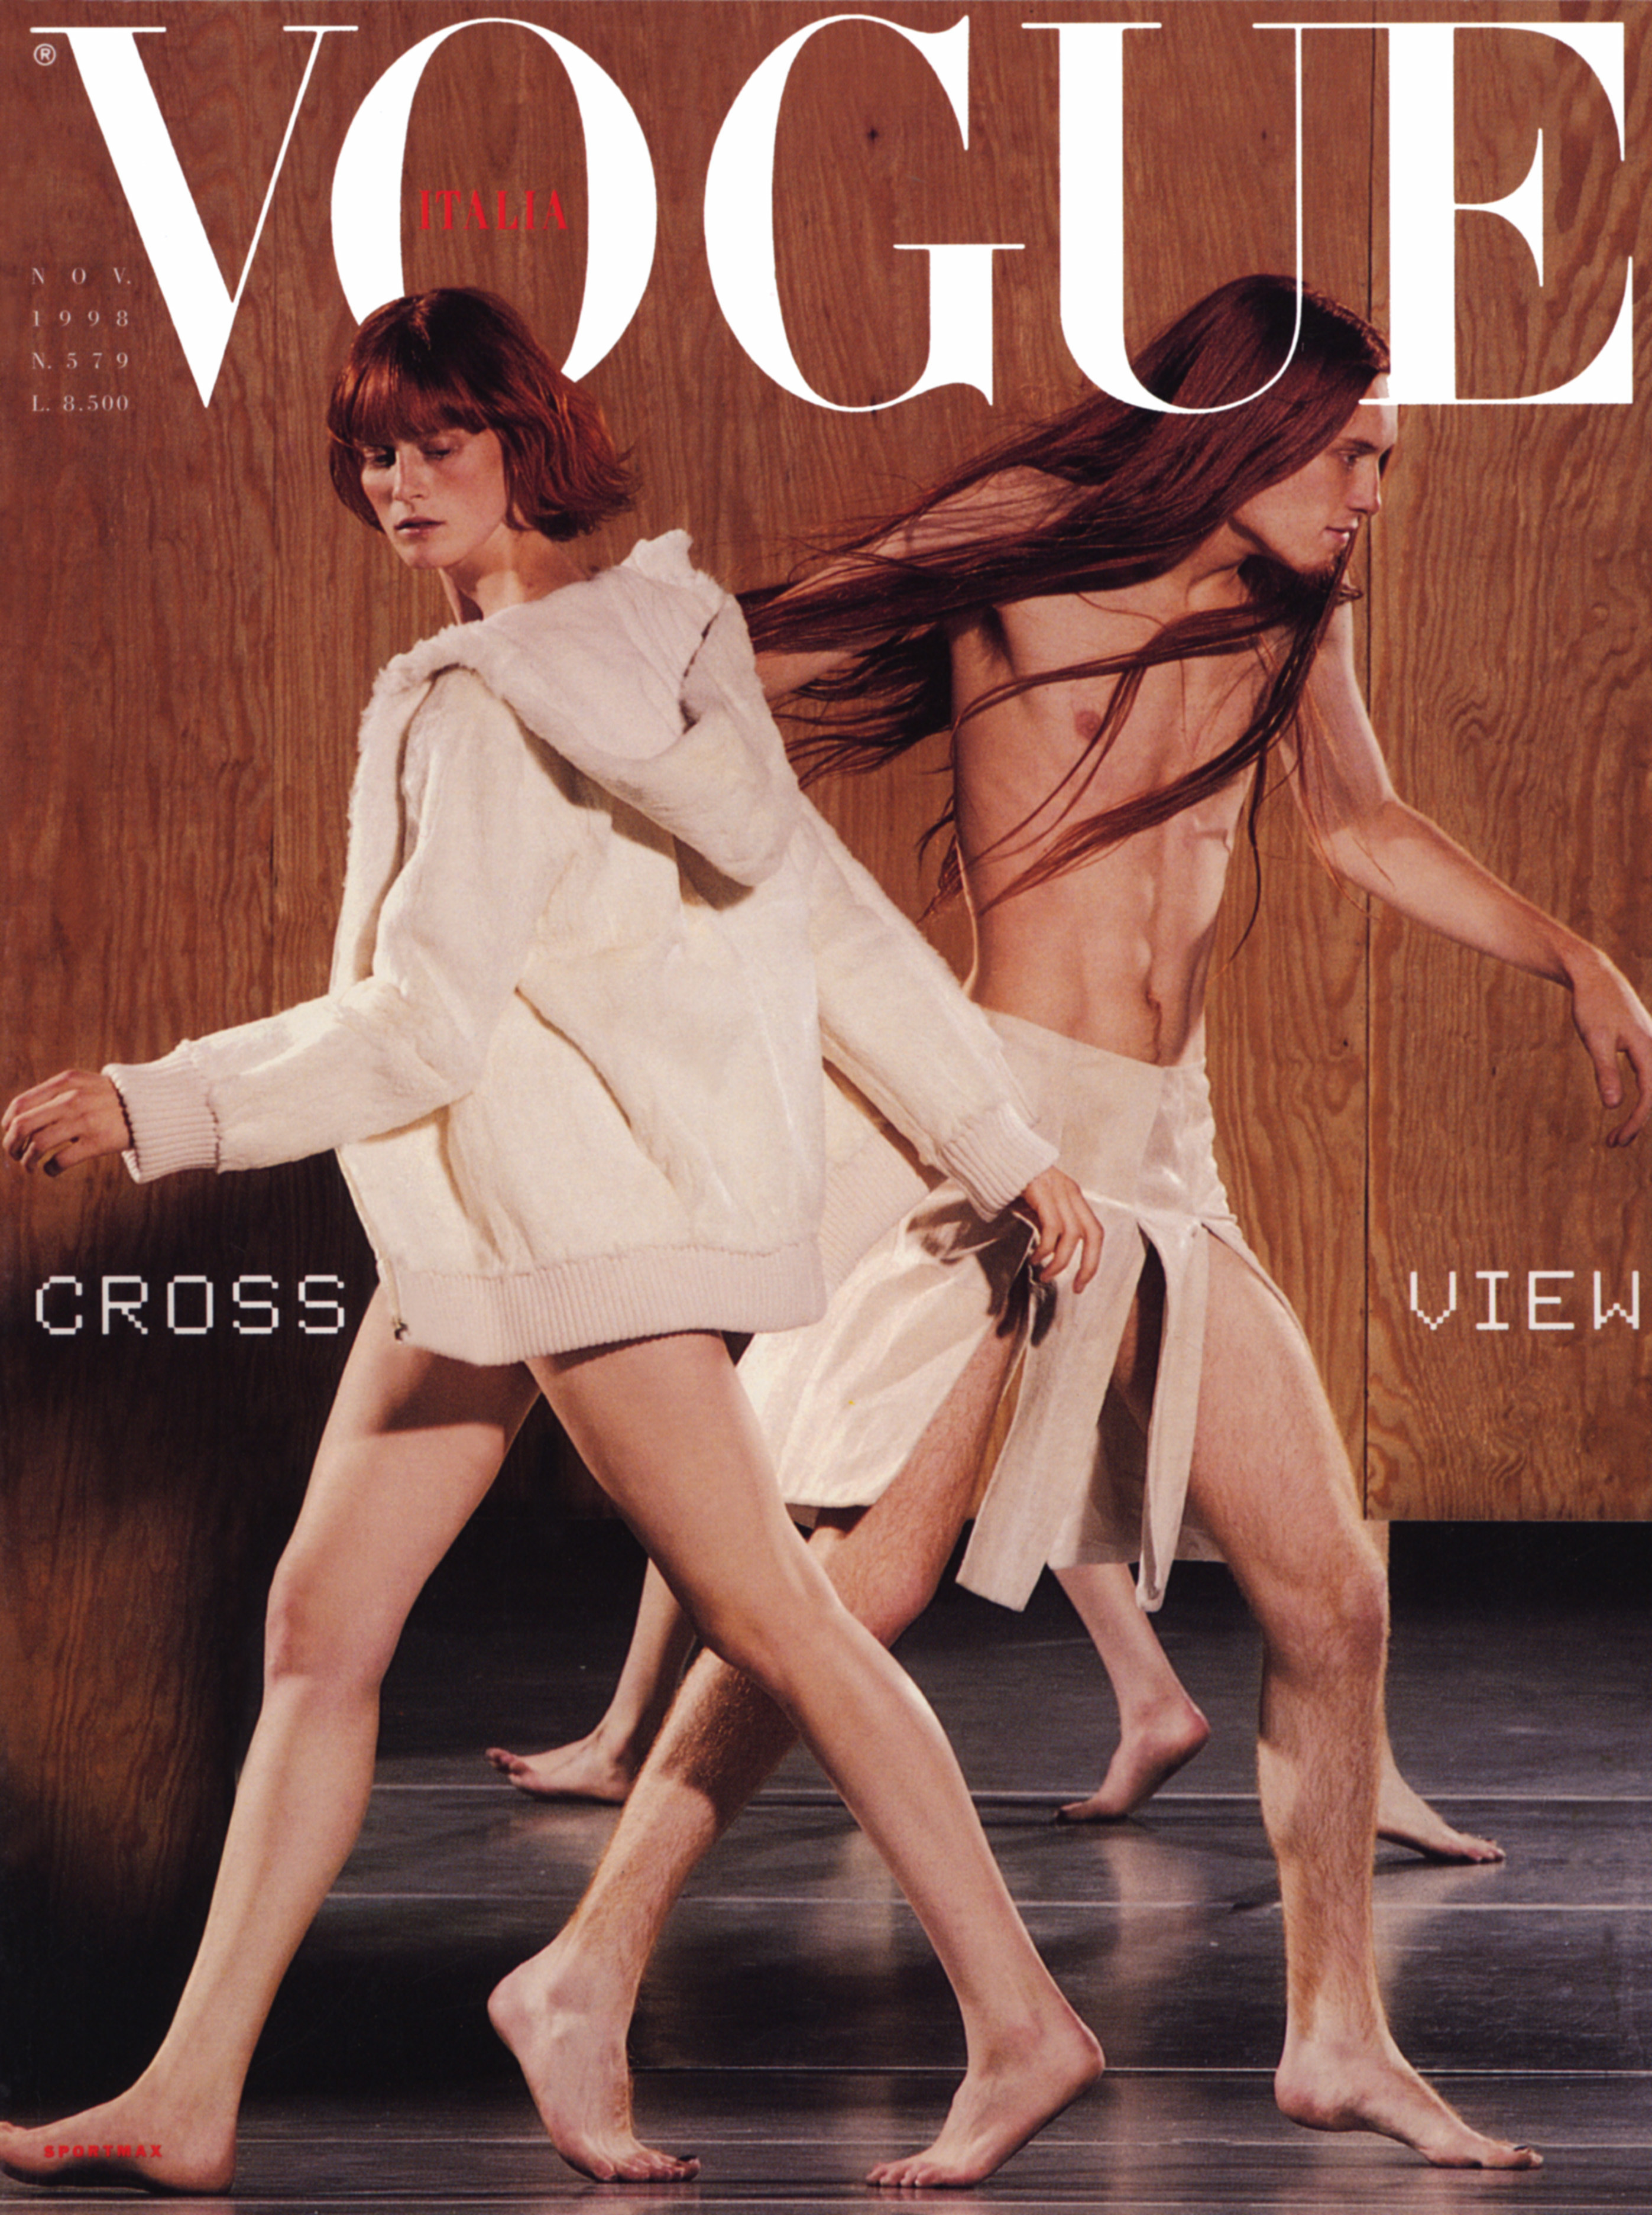 A Vogue cover with two people walking past each other